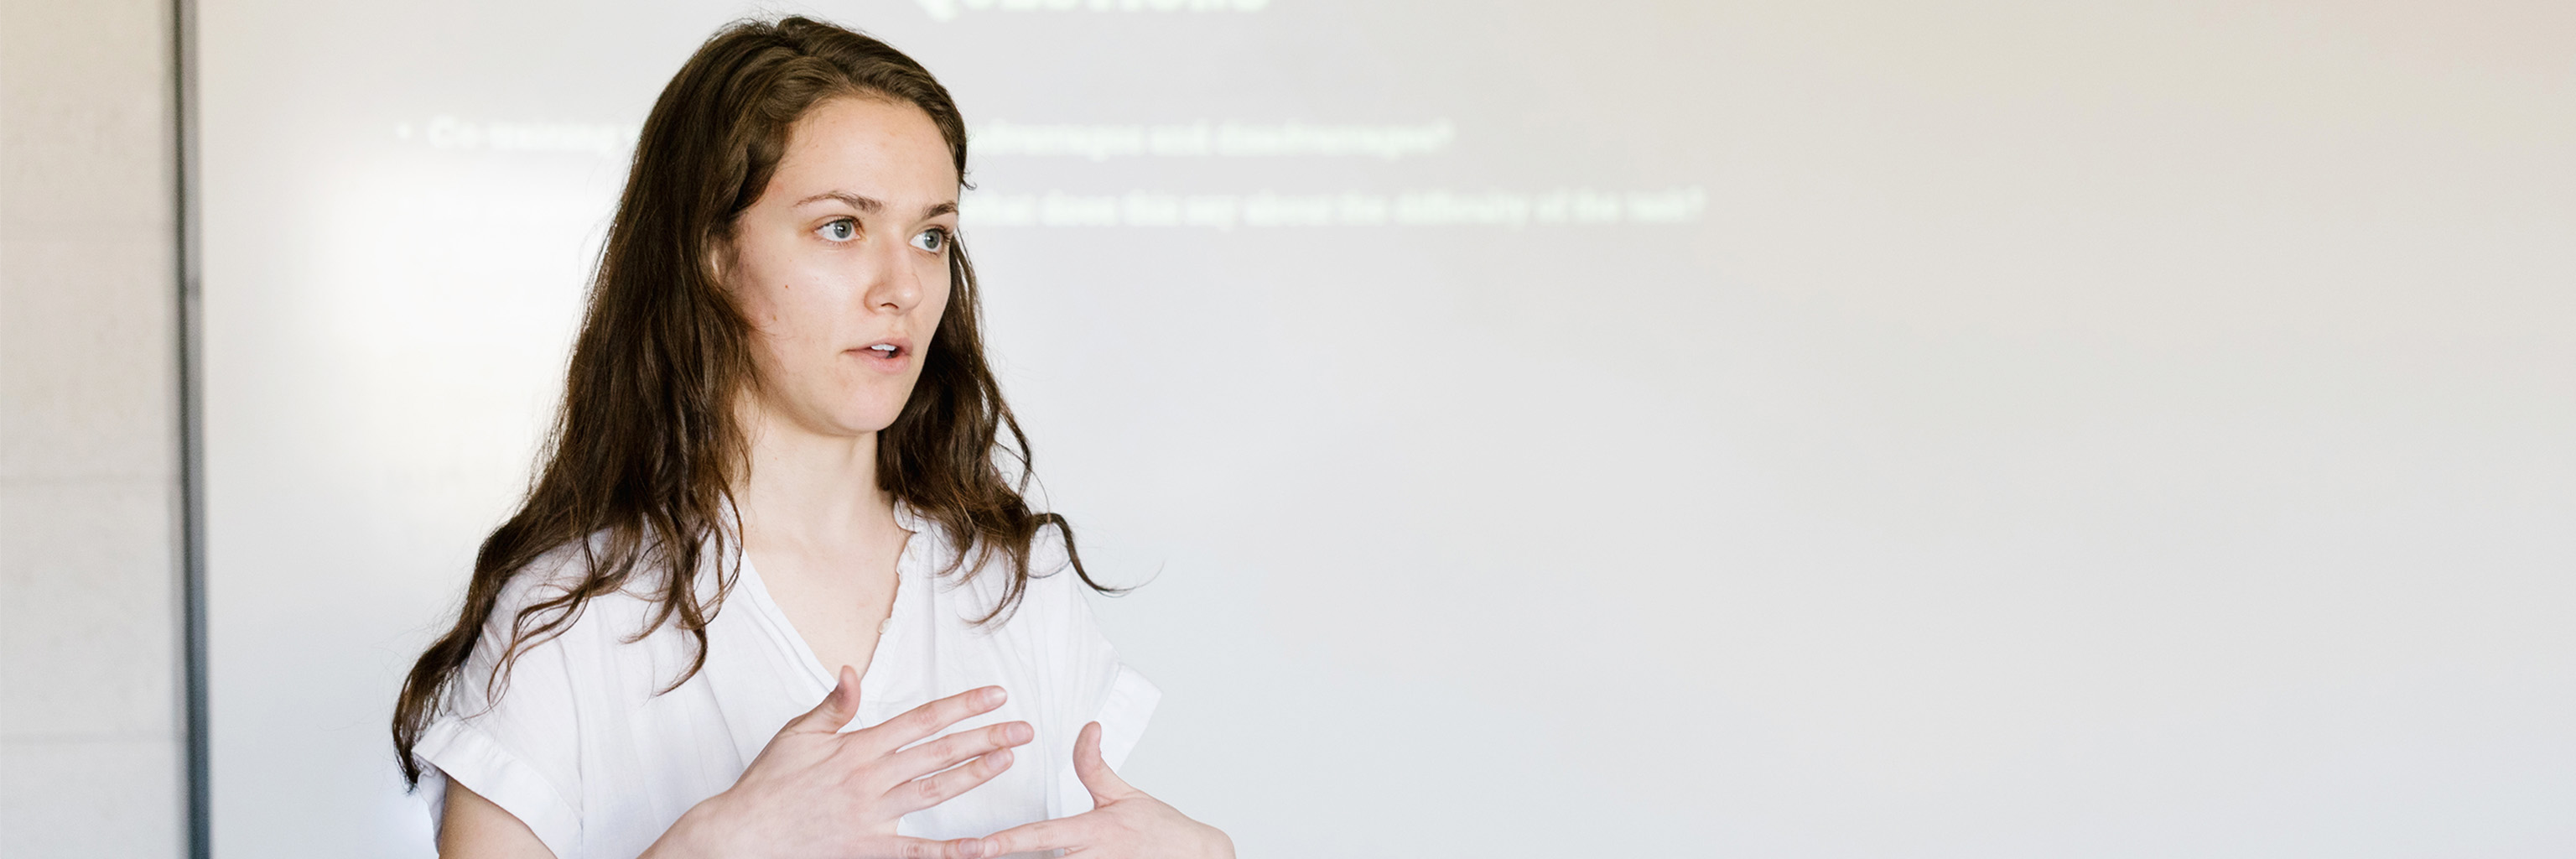 A student gesturing during a presentation.